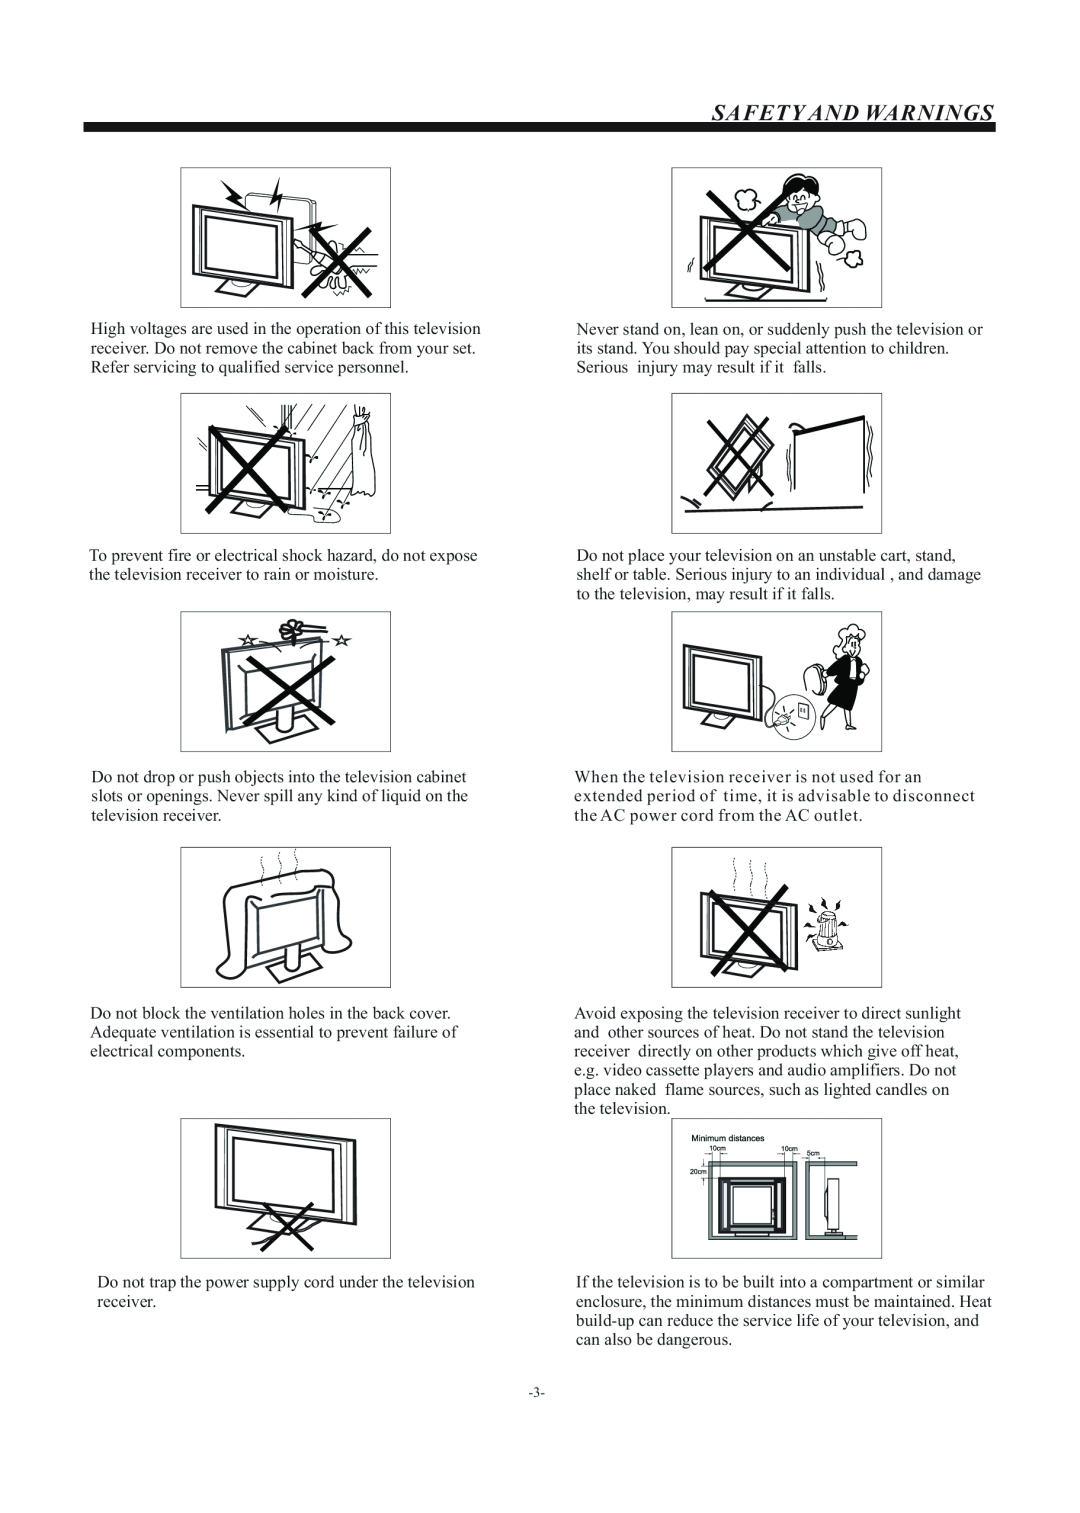 Haier LED LCD TV, LE32B50 owner manual Safety And Warnings, Do not trap the power supply cord under the television receiver 